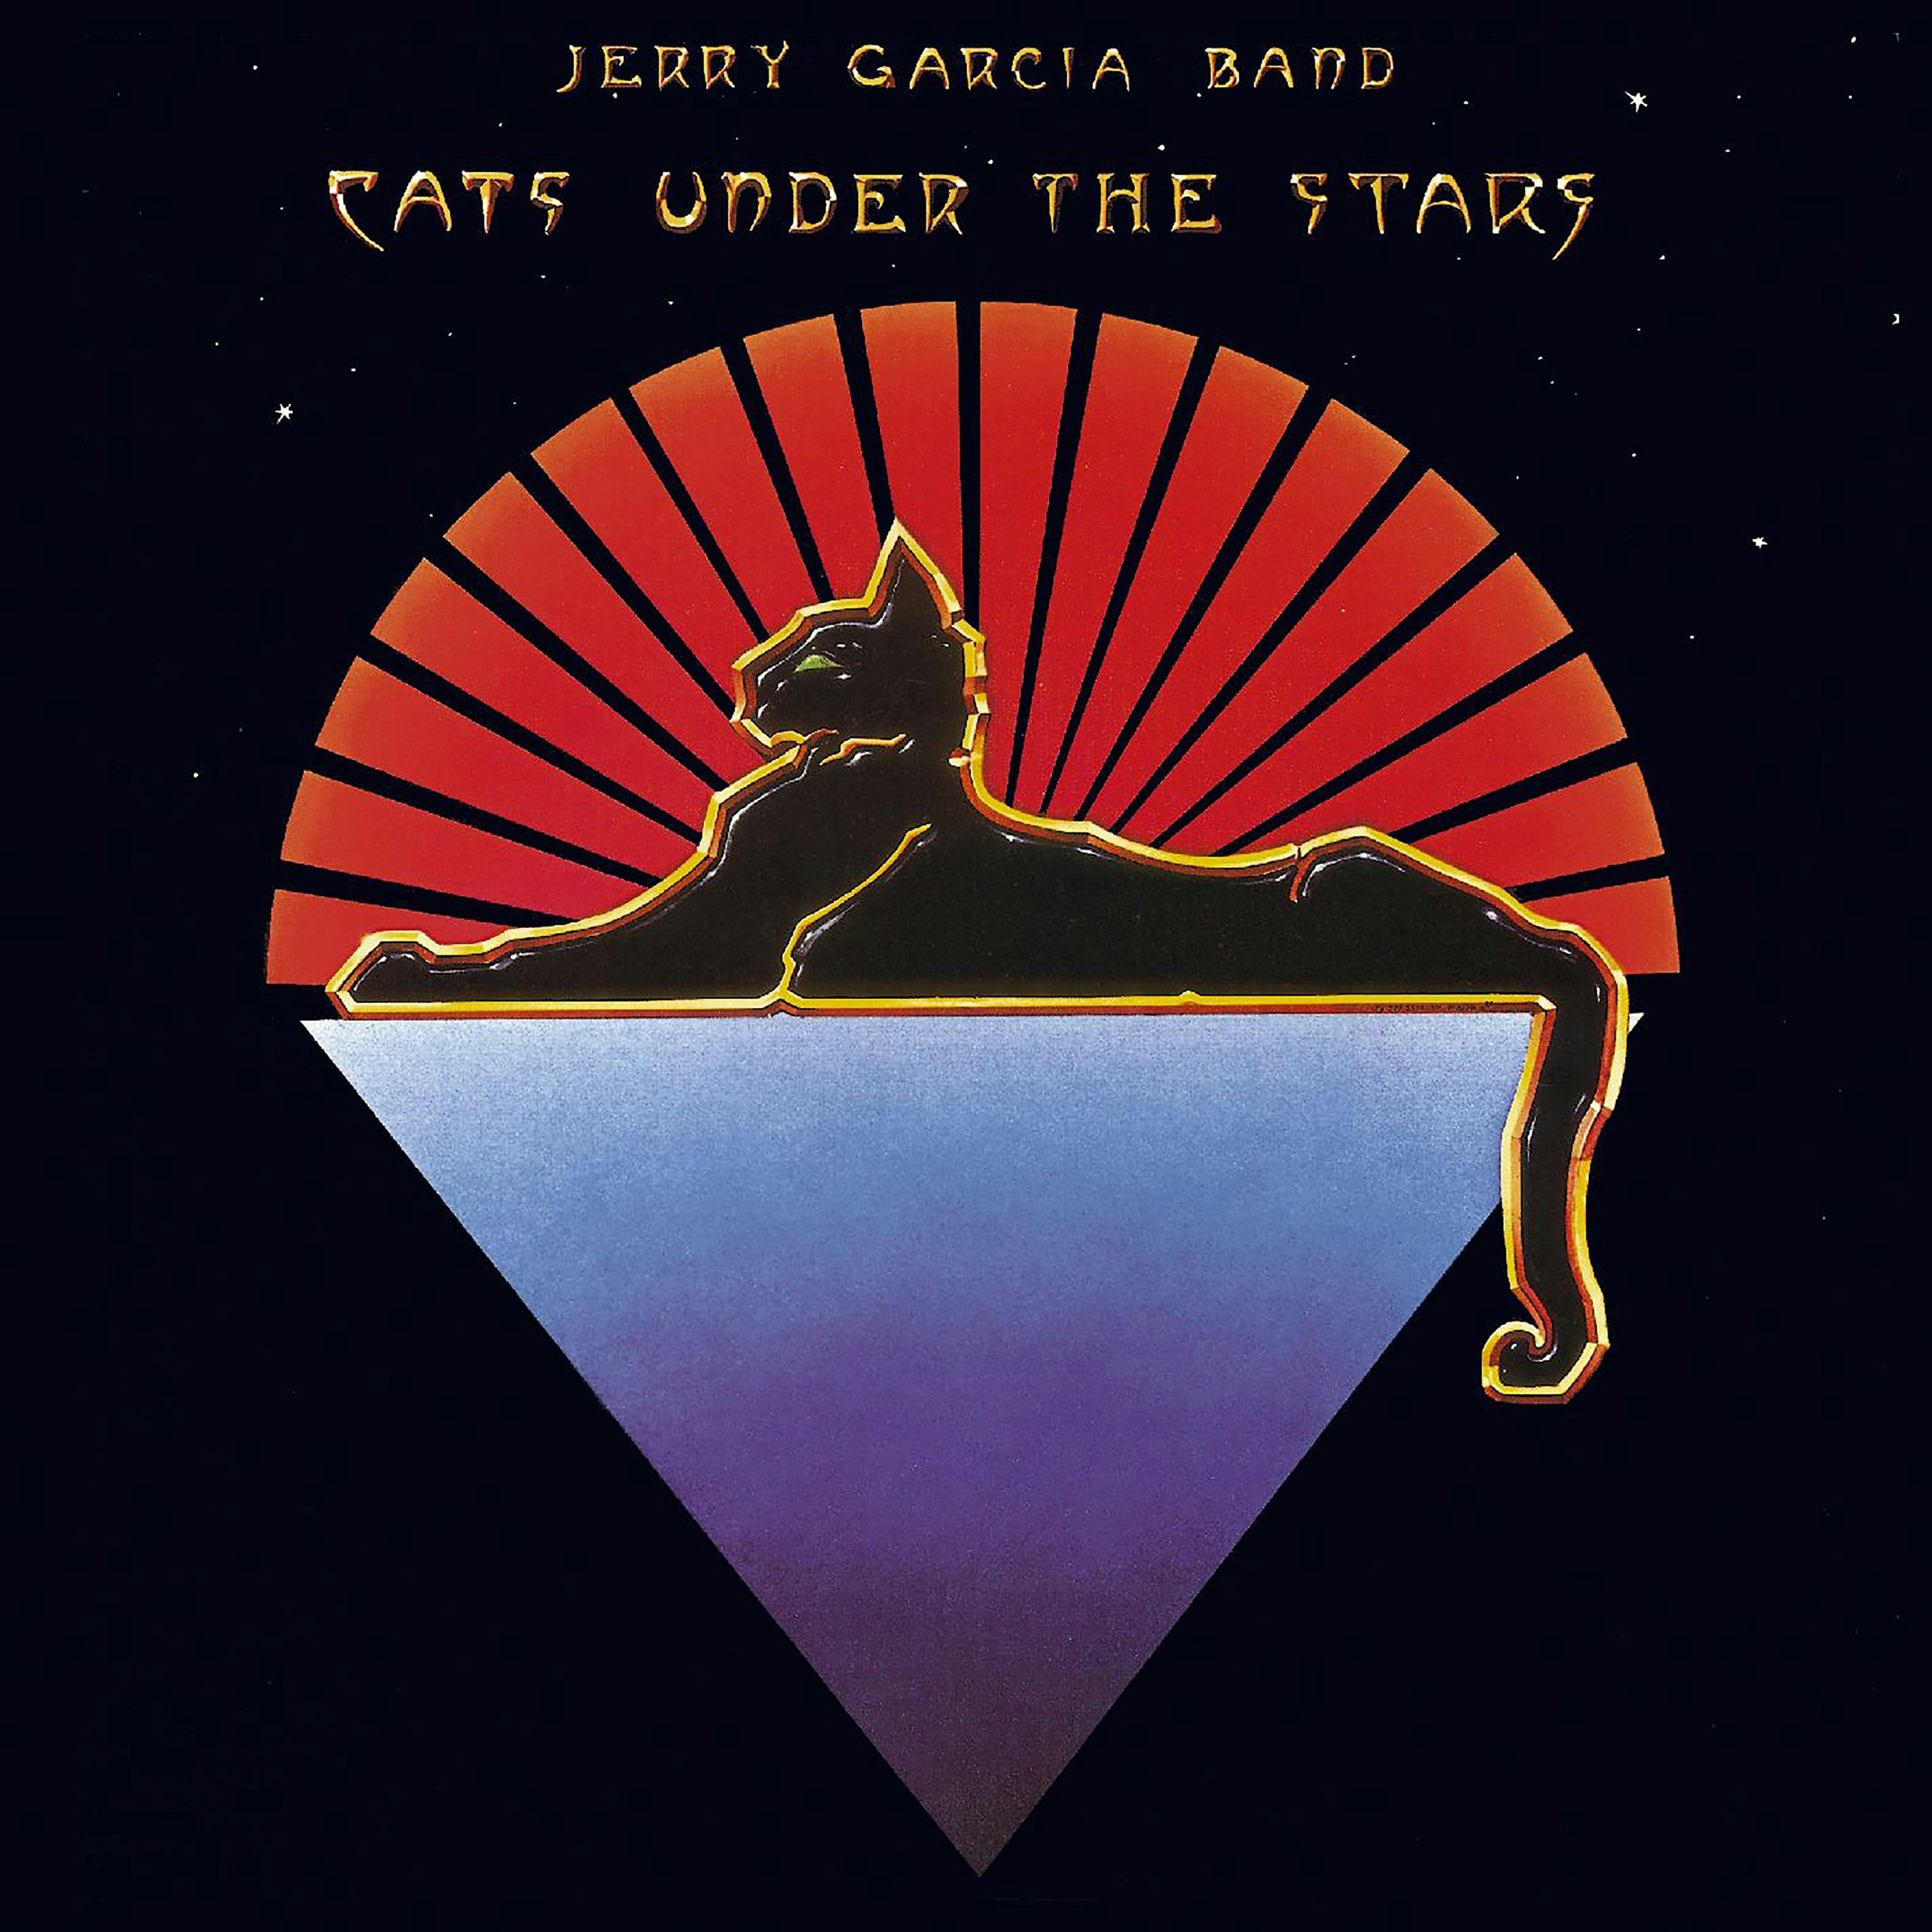 Album artwork for Cats Under The Stars by Jerry Garcia Band